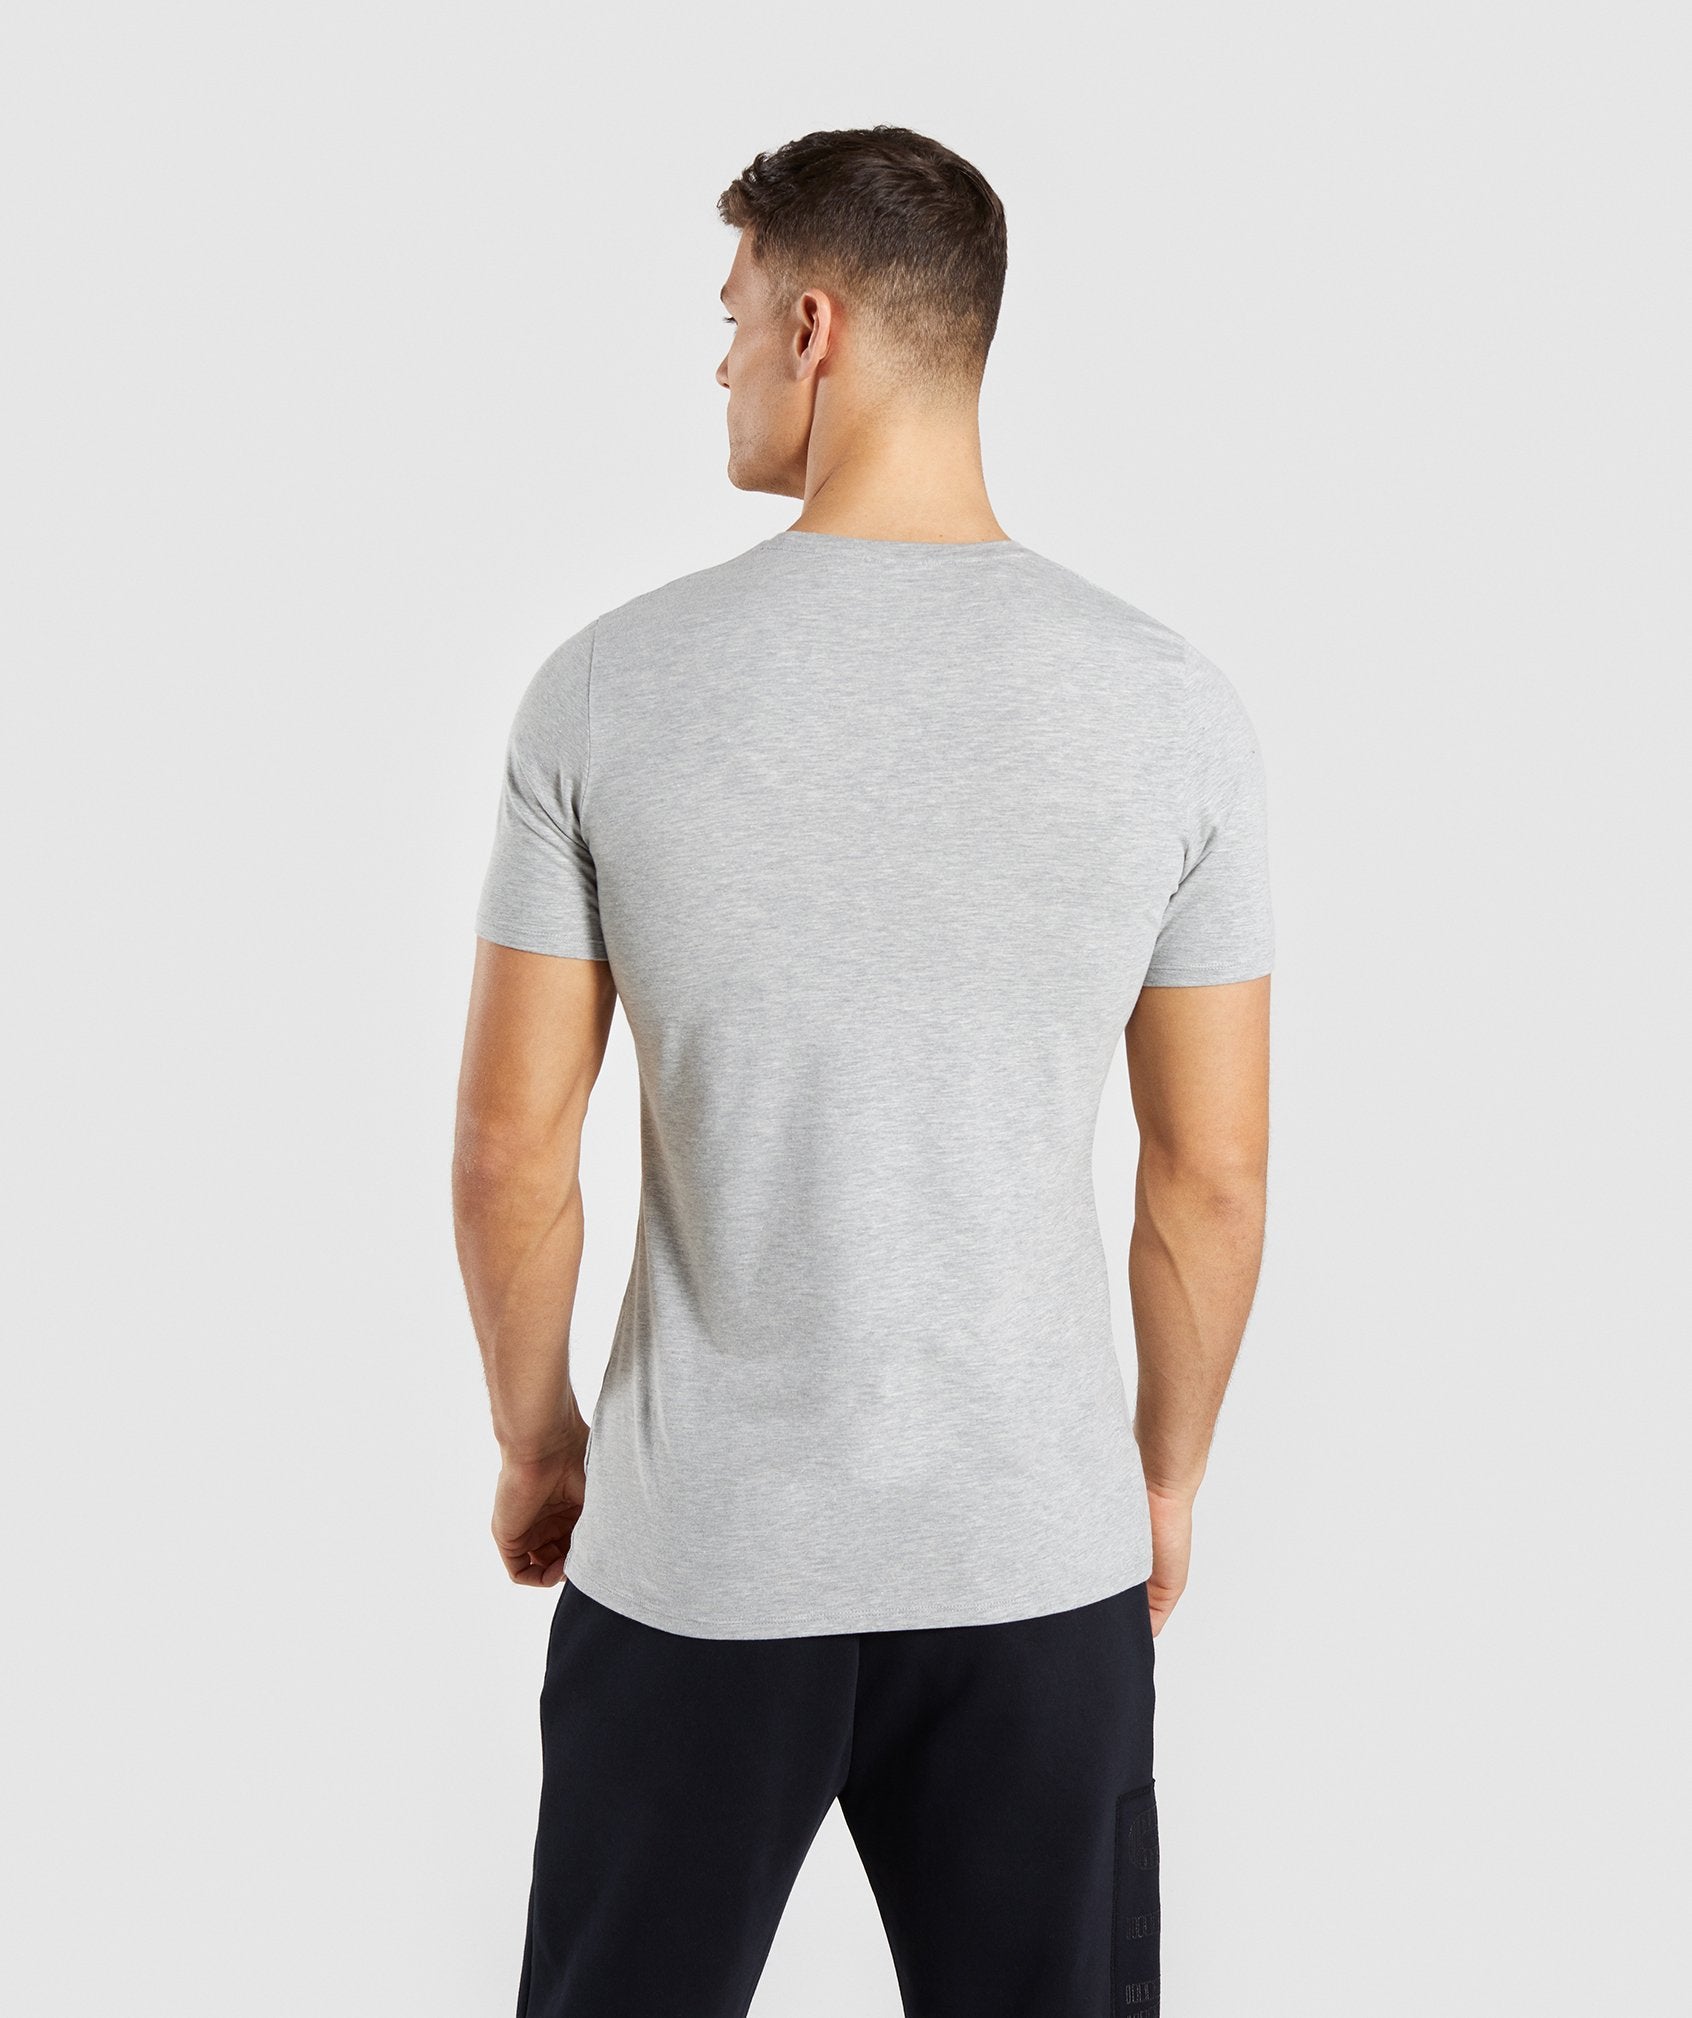 Align T-Shirt in Light Grey - view 2